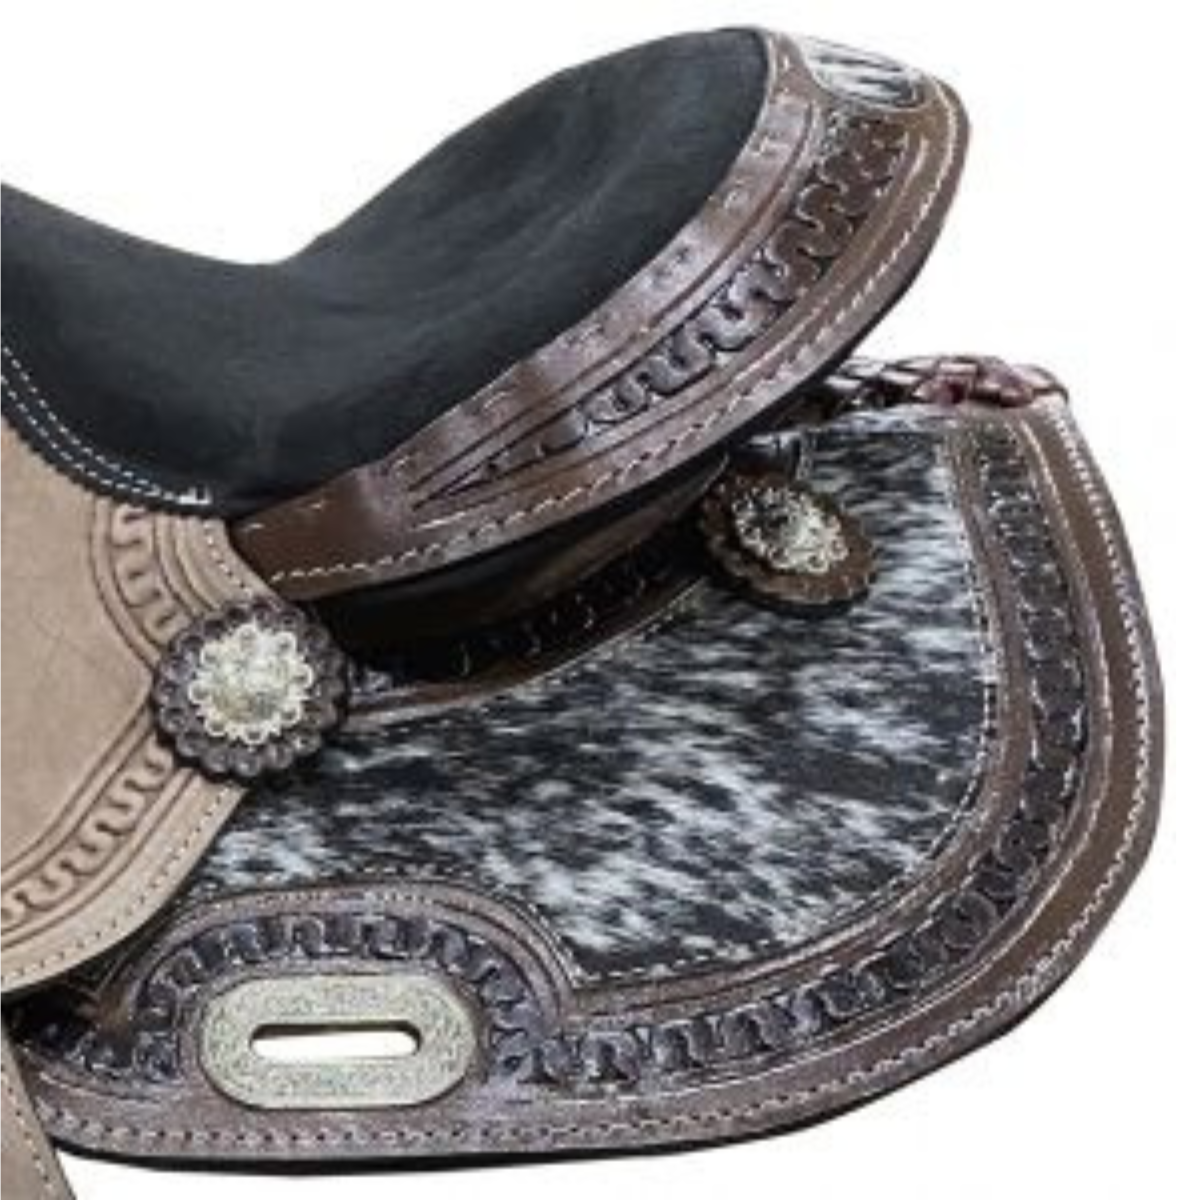 DOUBLE T 13" Youth barrel saddle with hair on cowhide inlay. - Double T Saddles